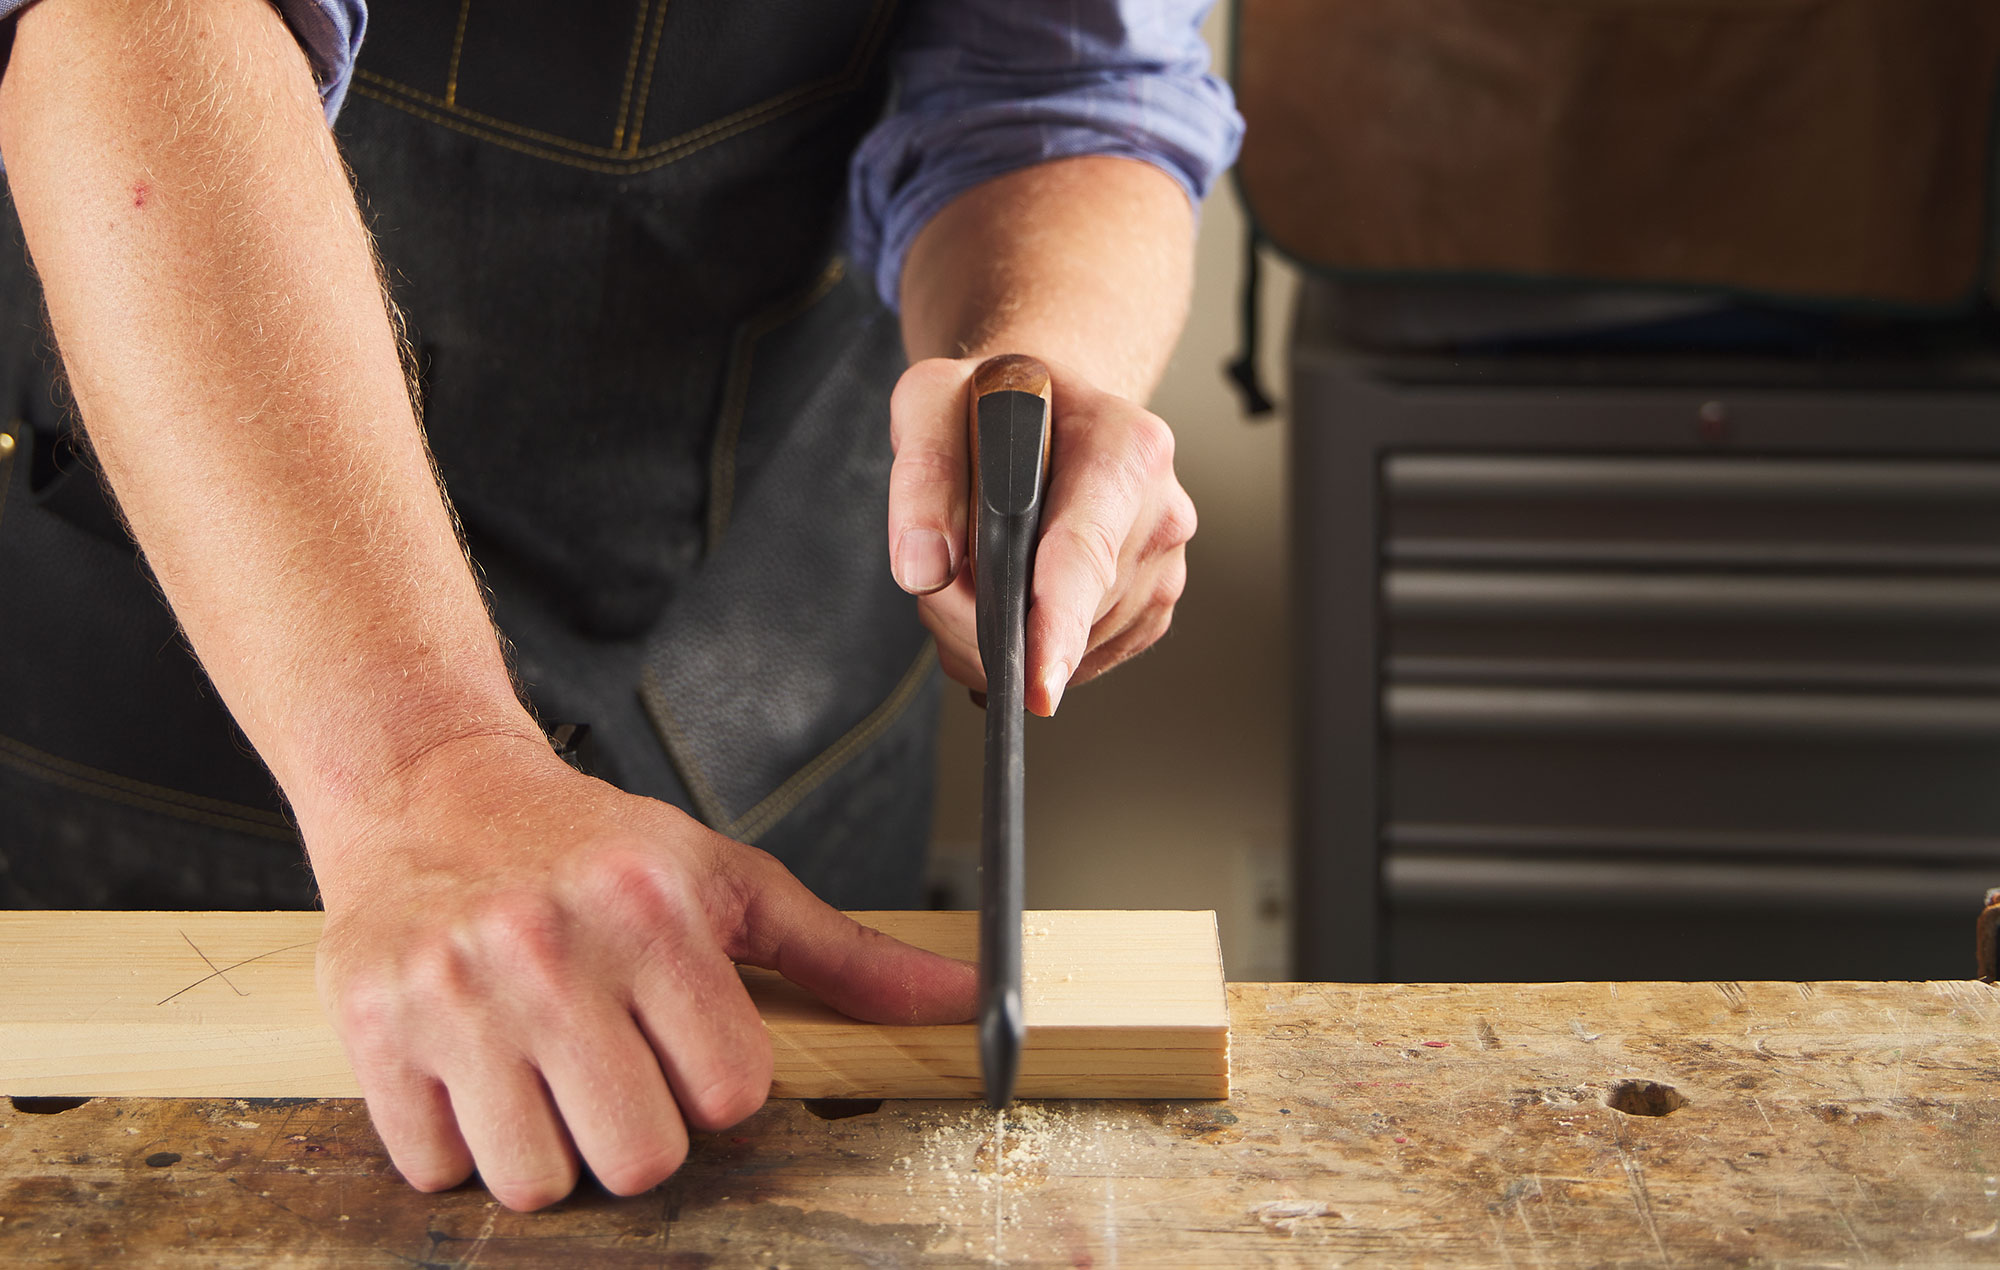 A man with his arm aligned with the saw making a cut